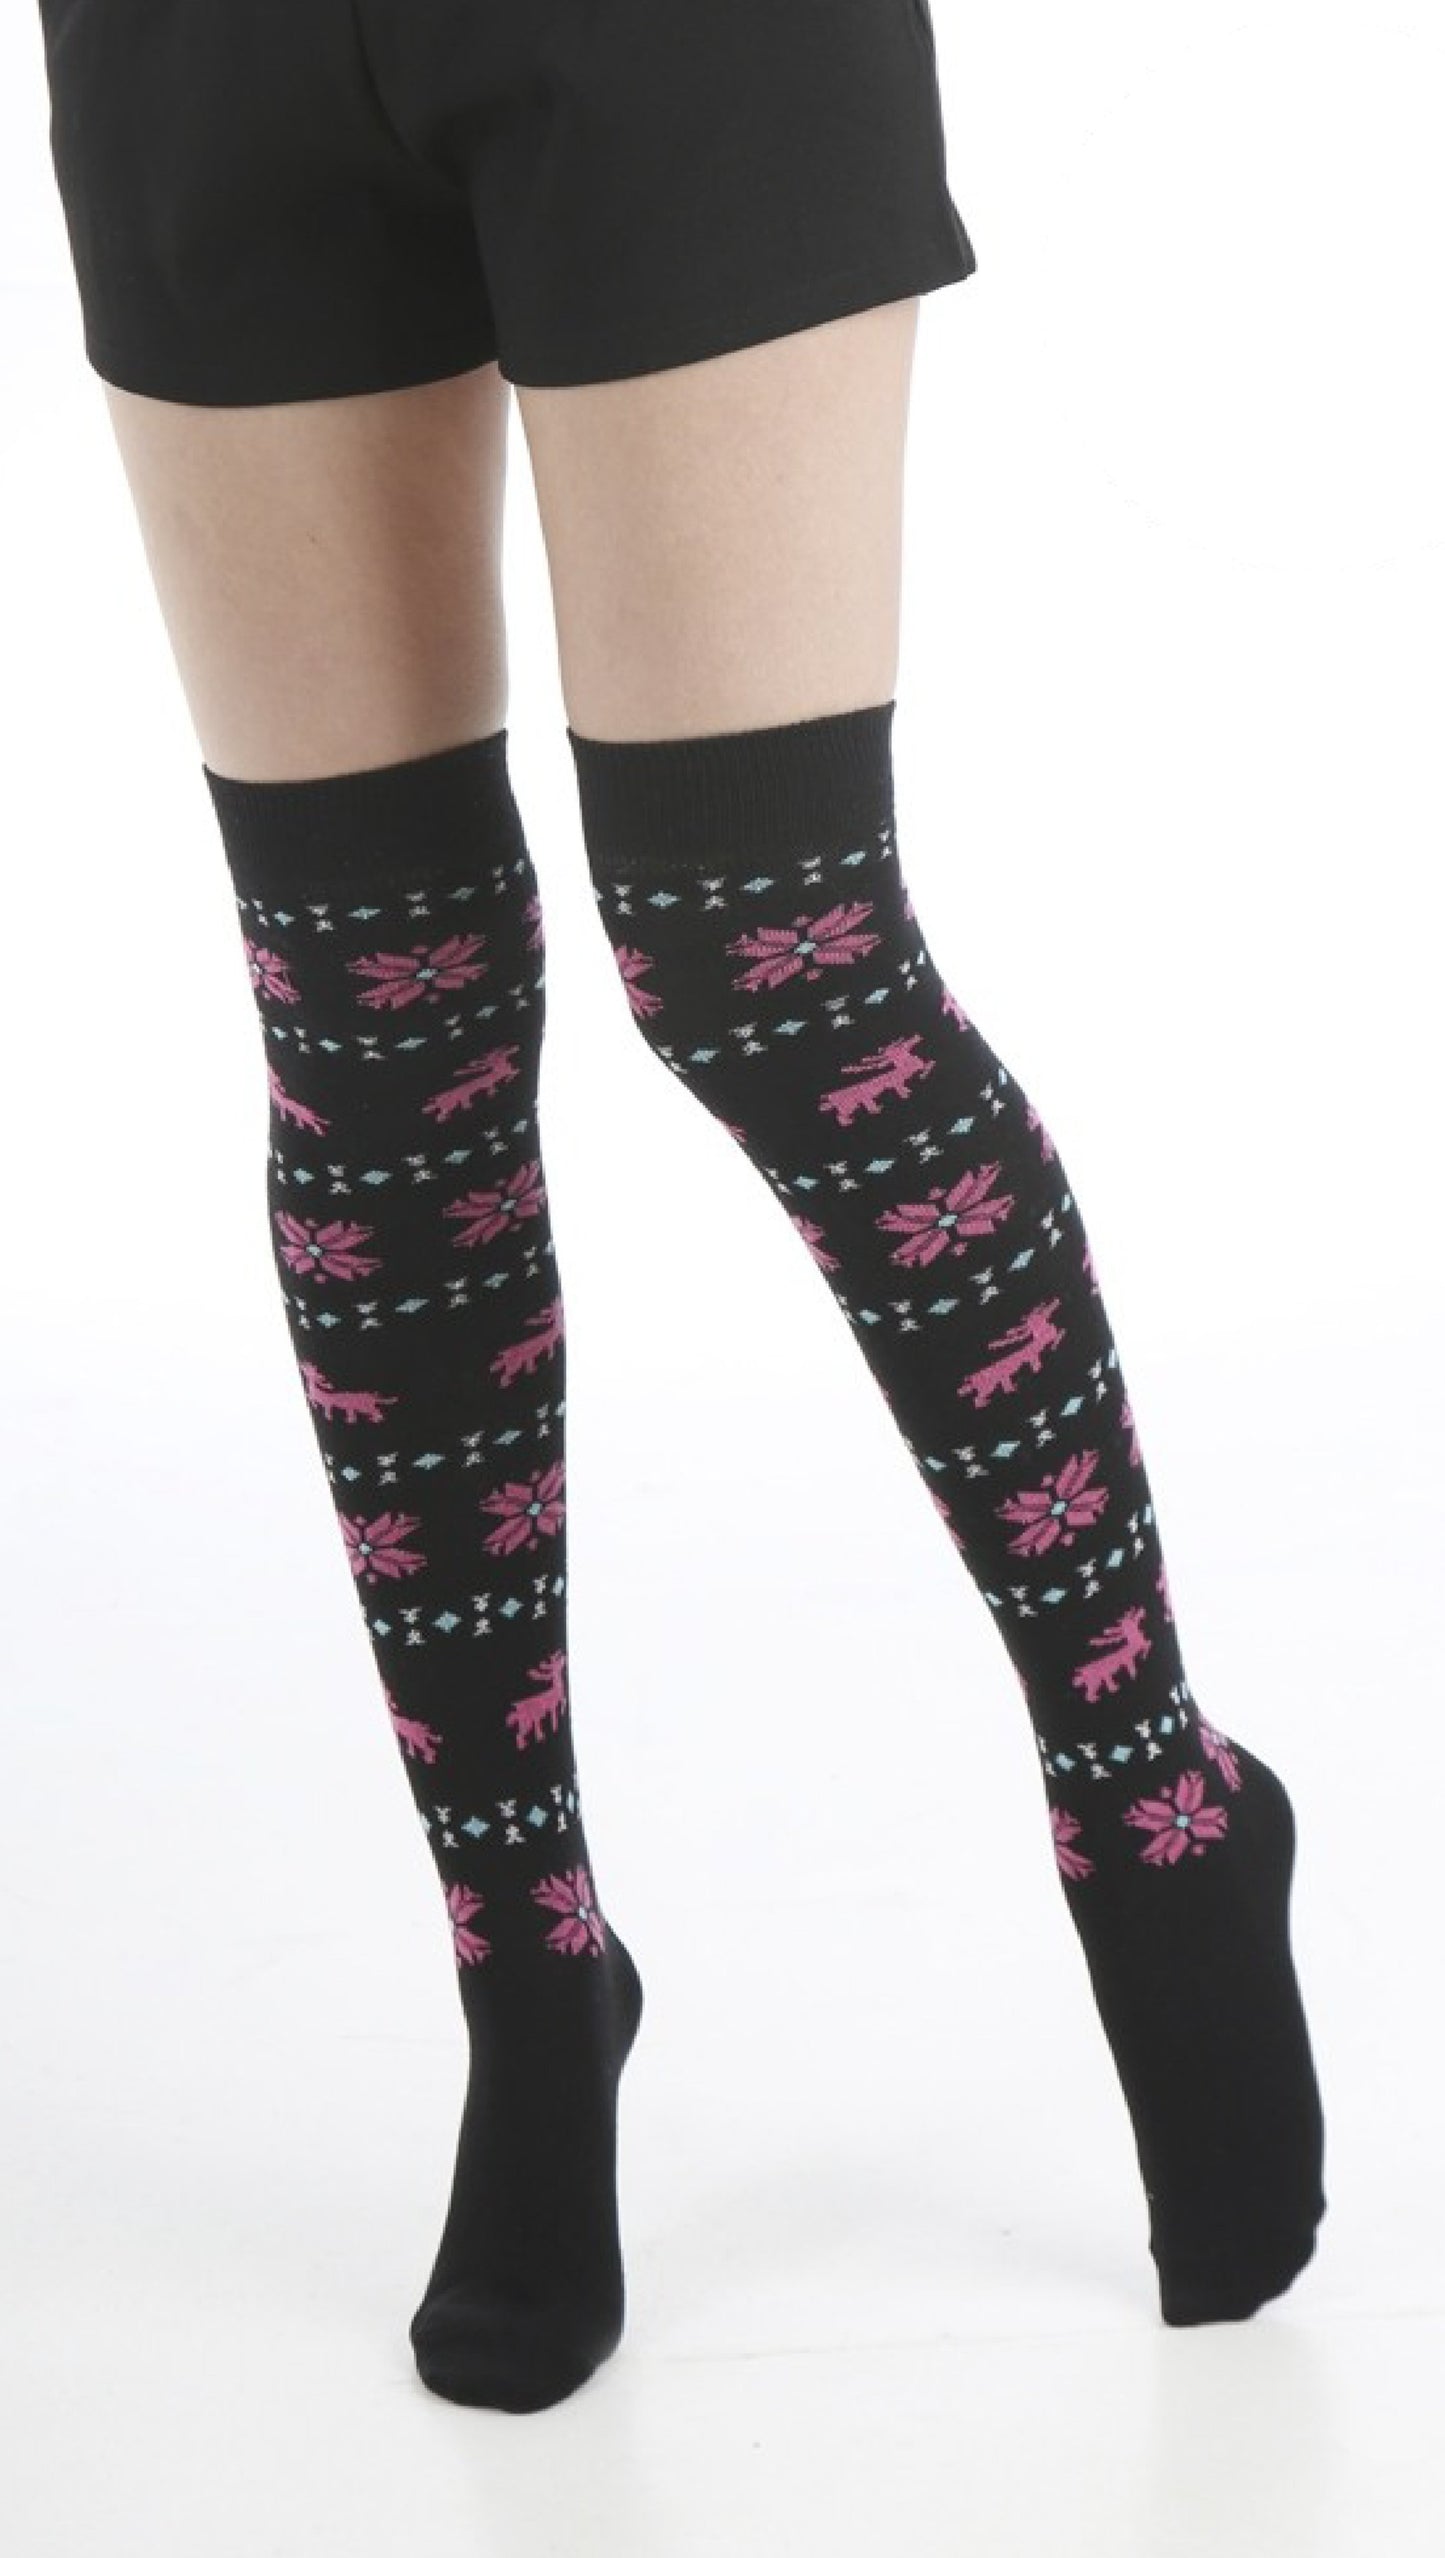 Pamela Mann Xmas Reindeer Over-Knee Socks - Christmas over the knee cotton socks with a fairisle style pattern of reindeers, snowflakes and diamond shapes. Available in black and pink